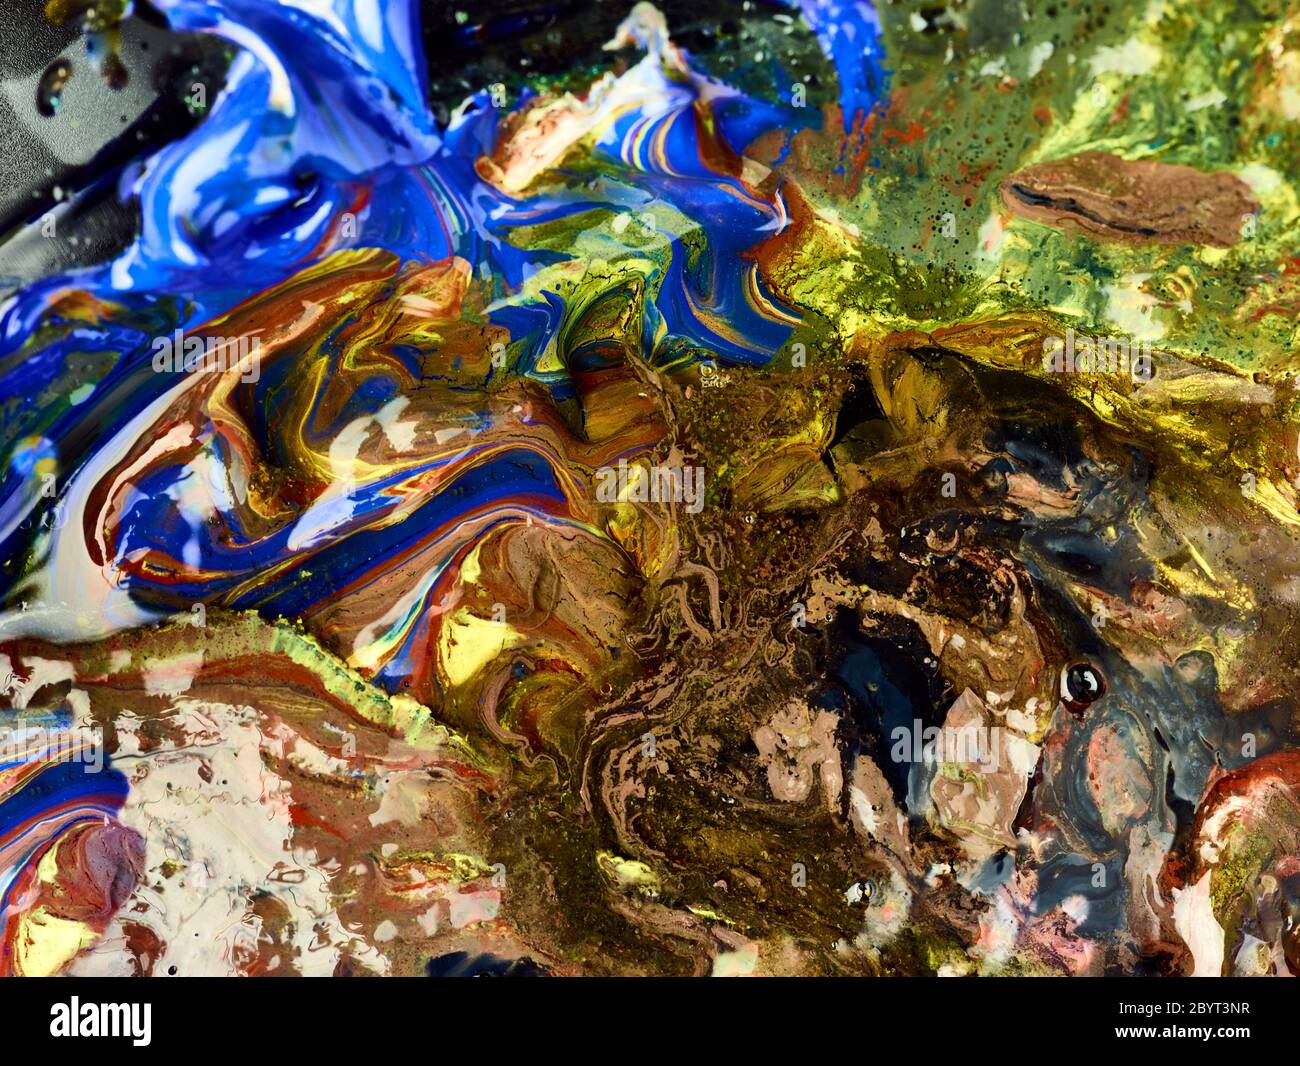 Abstract of colourful and transient paint swirls Stock Photo